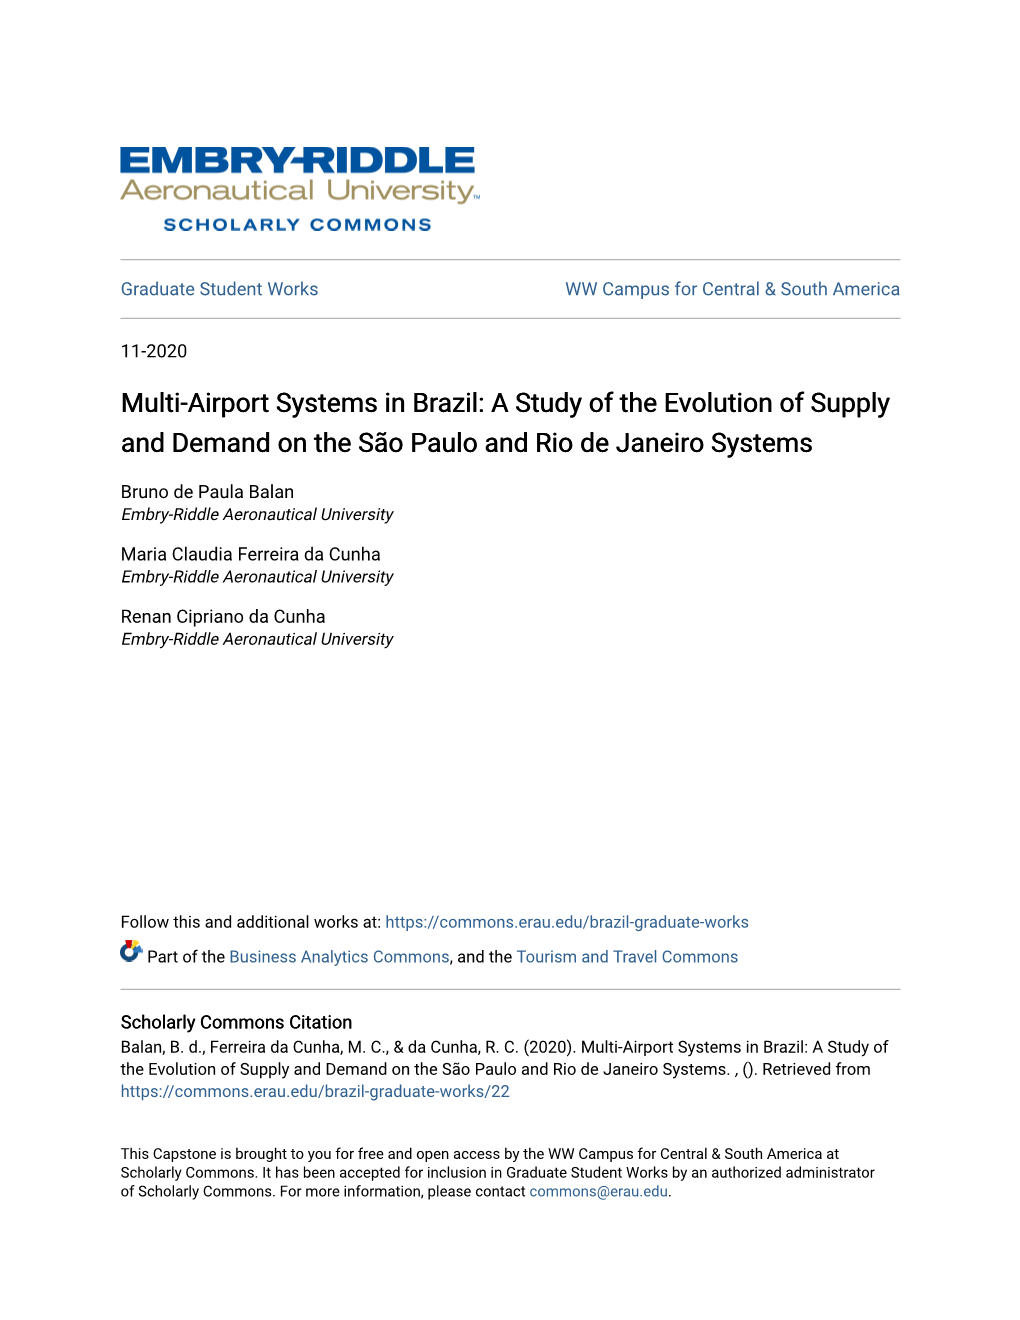 Multi-Airport Systems in Brazil: a Study of the Evolution of Supply and Demand on the São Paulo and Rio De Janeiro Systems